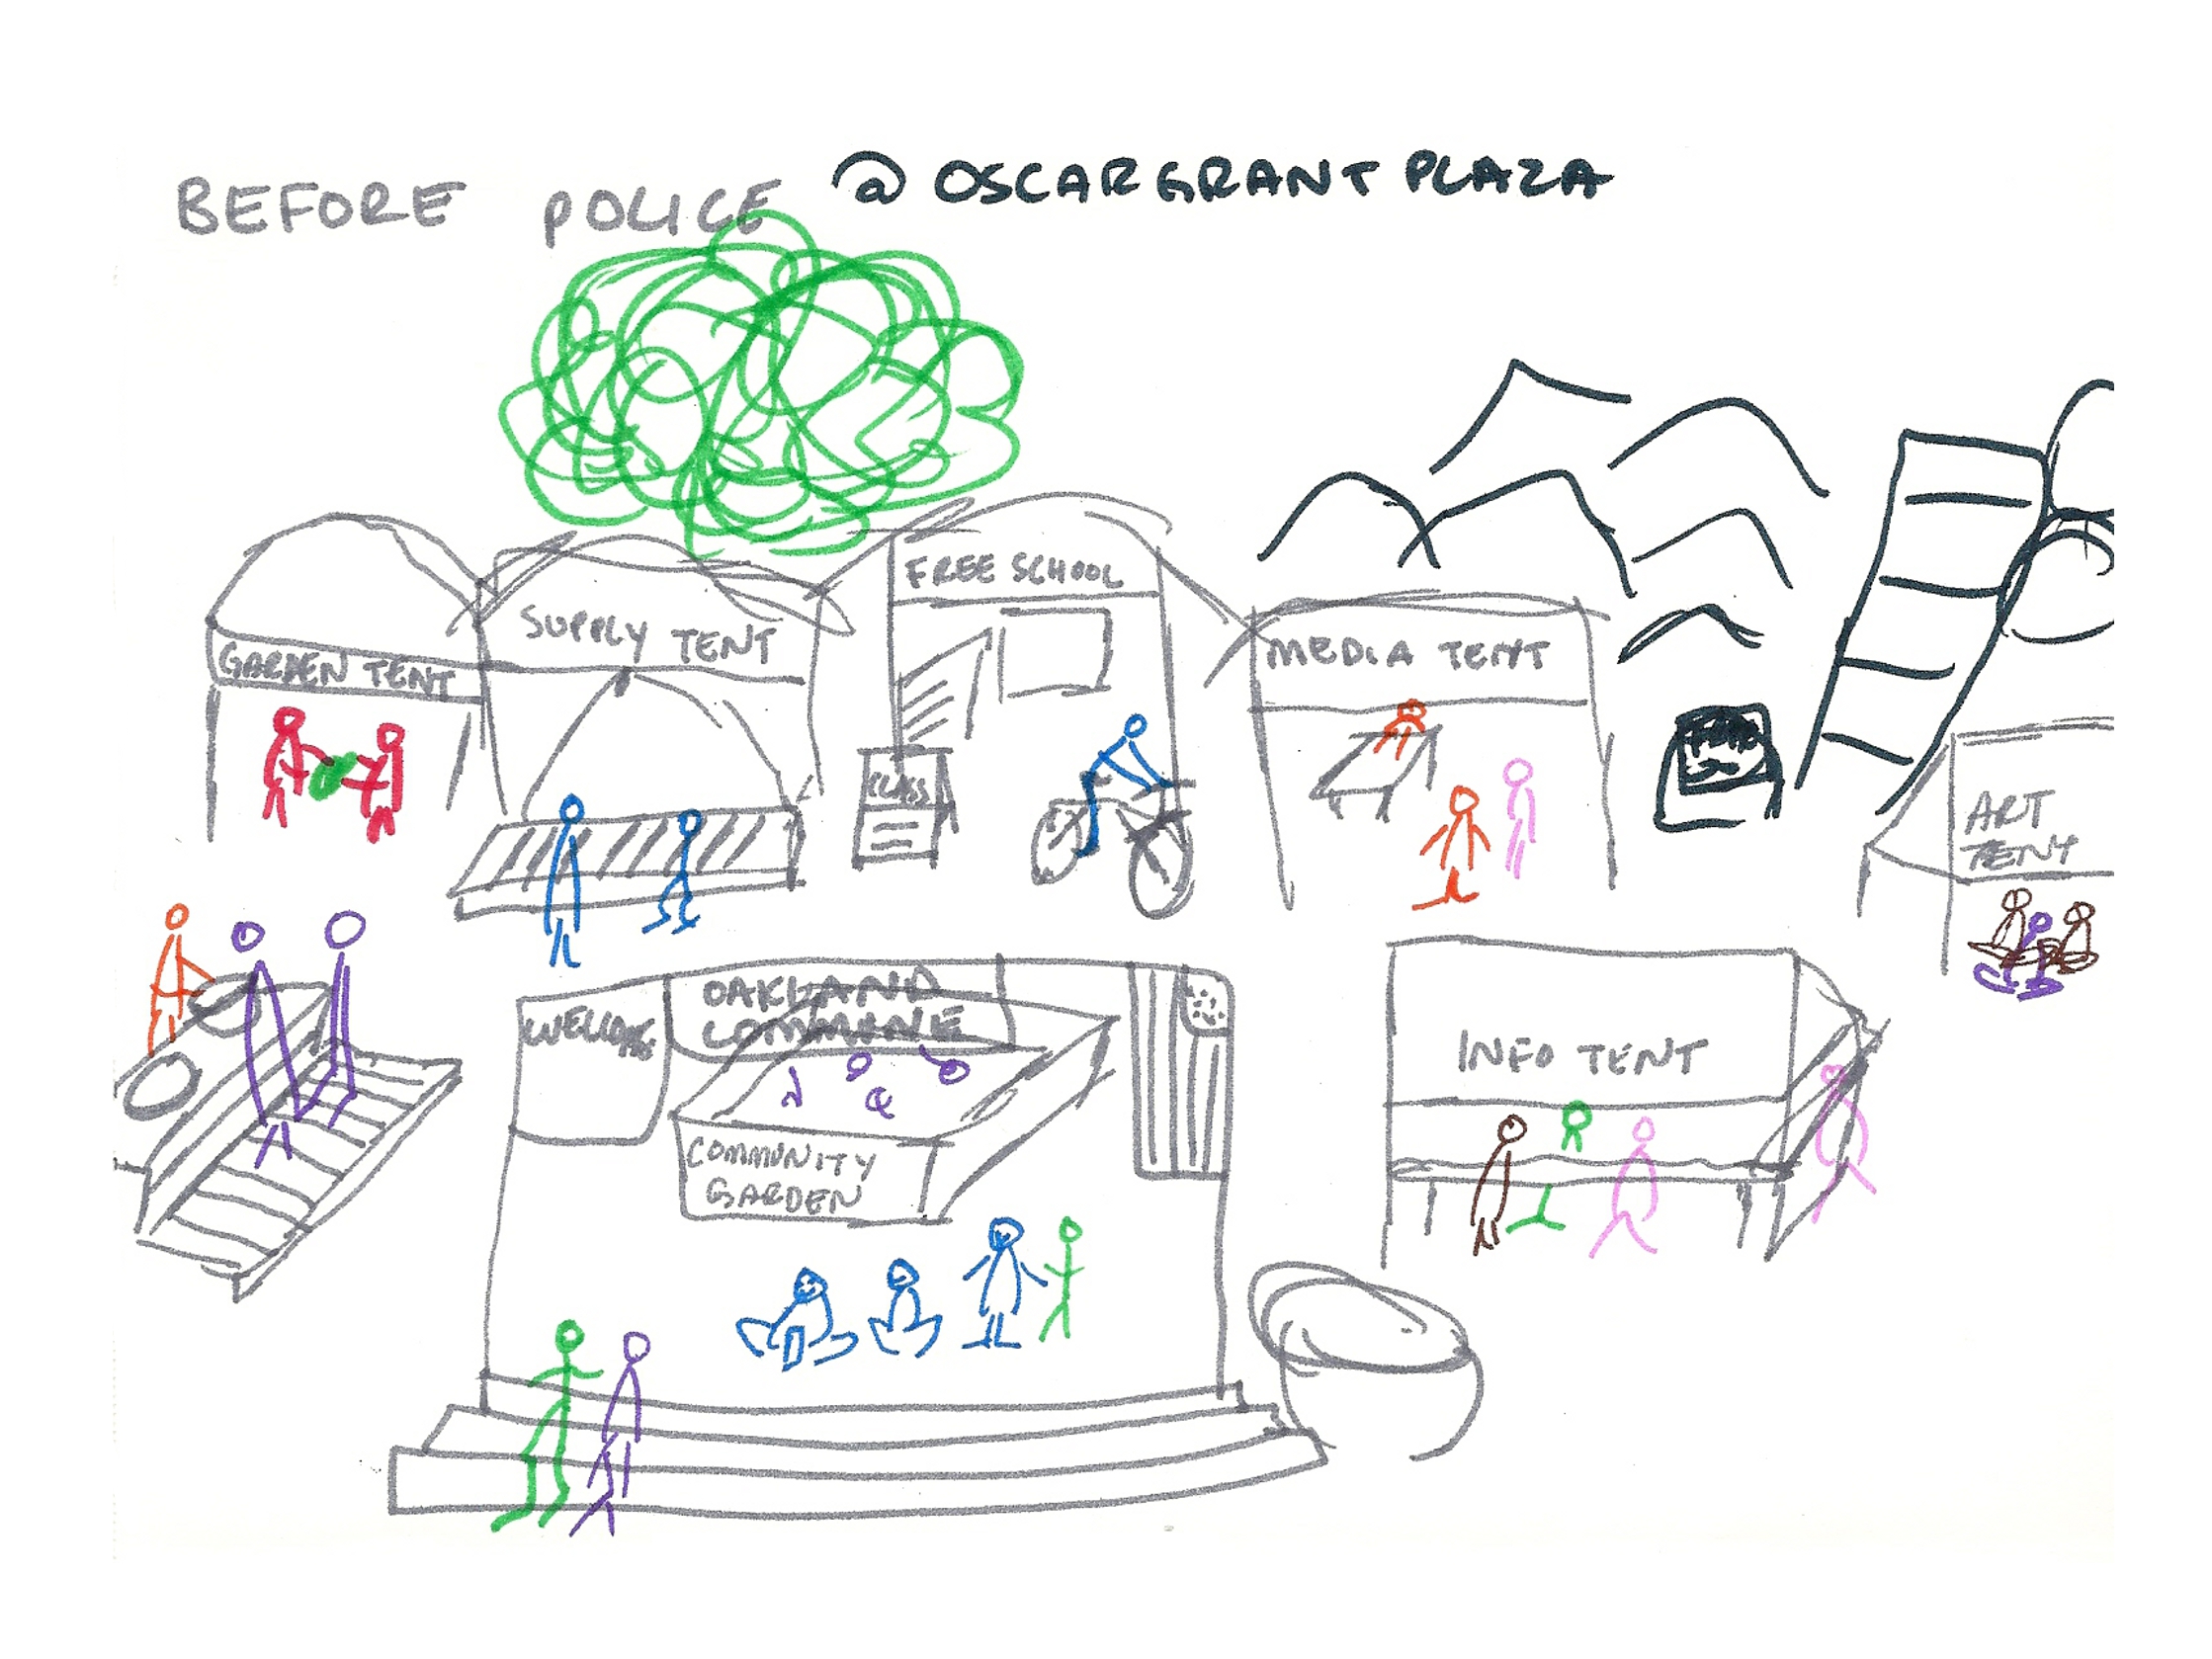 Drawing of the Occupy Oakland encampment Oscar Grant Plaza before the raid